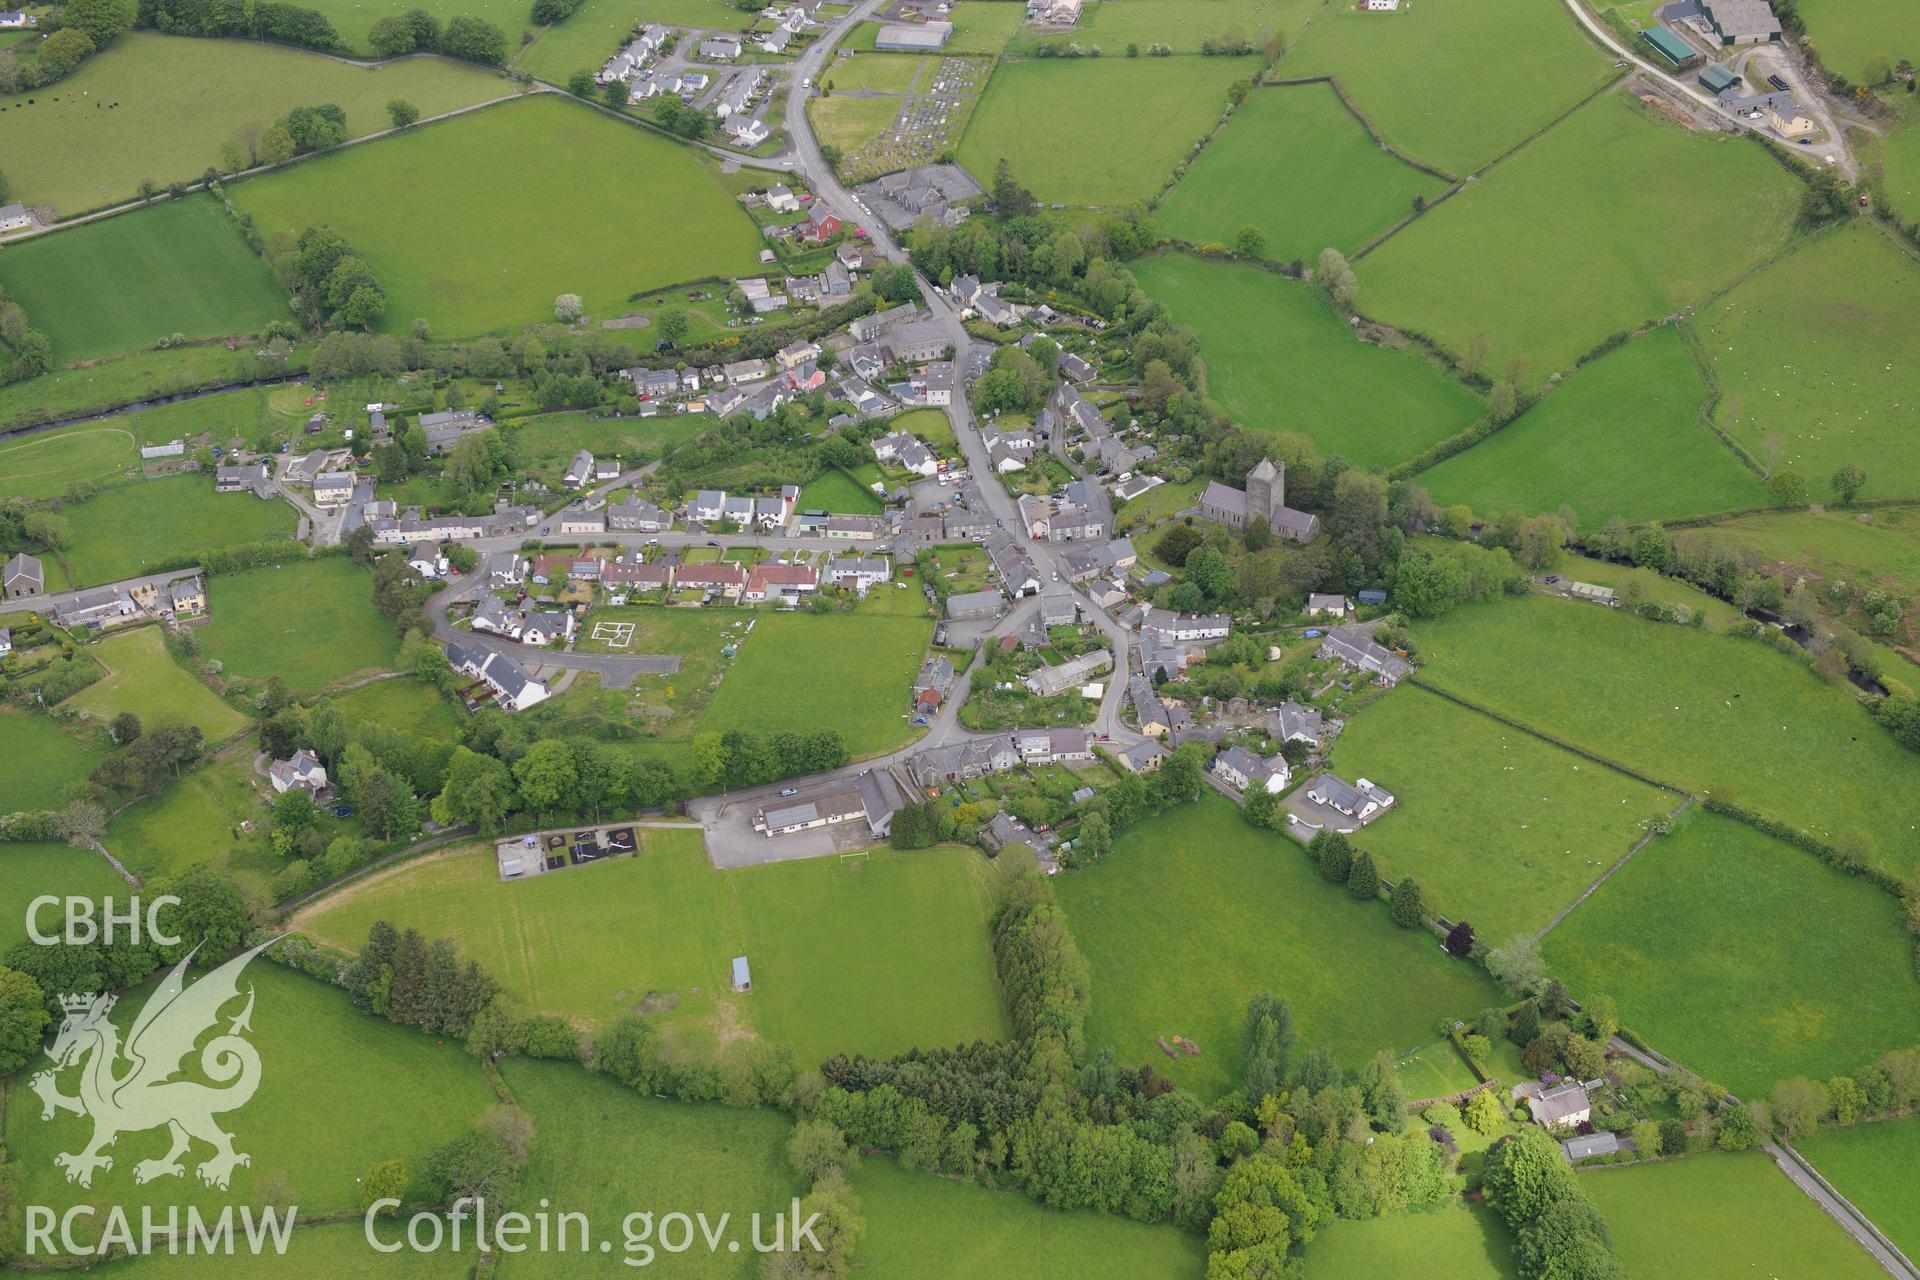 St. David's Church, Llanddewi Brefi. Oblique aerial photograph taken during the Royal Commission's programme of archaeological aerial reconnaissance by Toby Driver on 3rd June 2015.